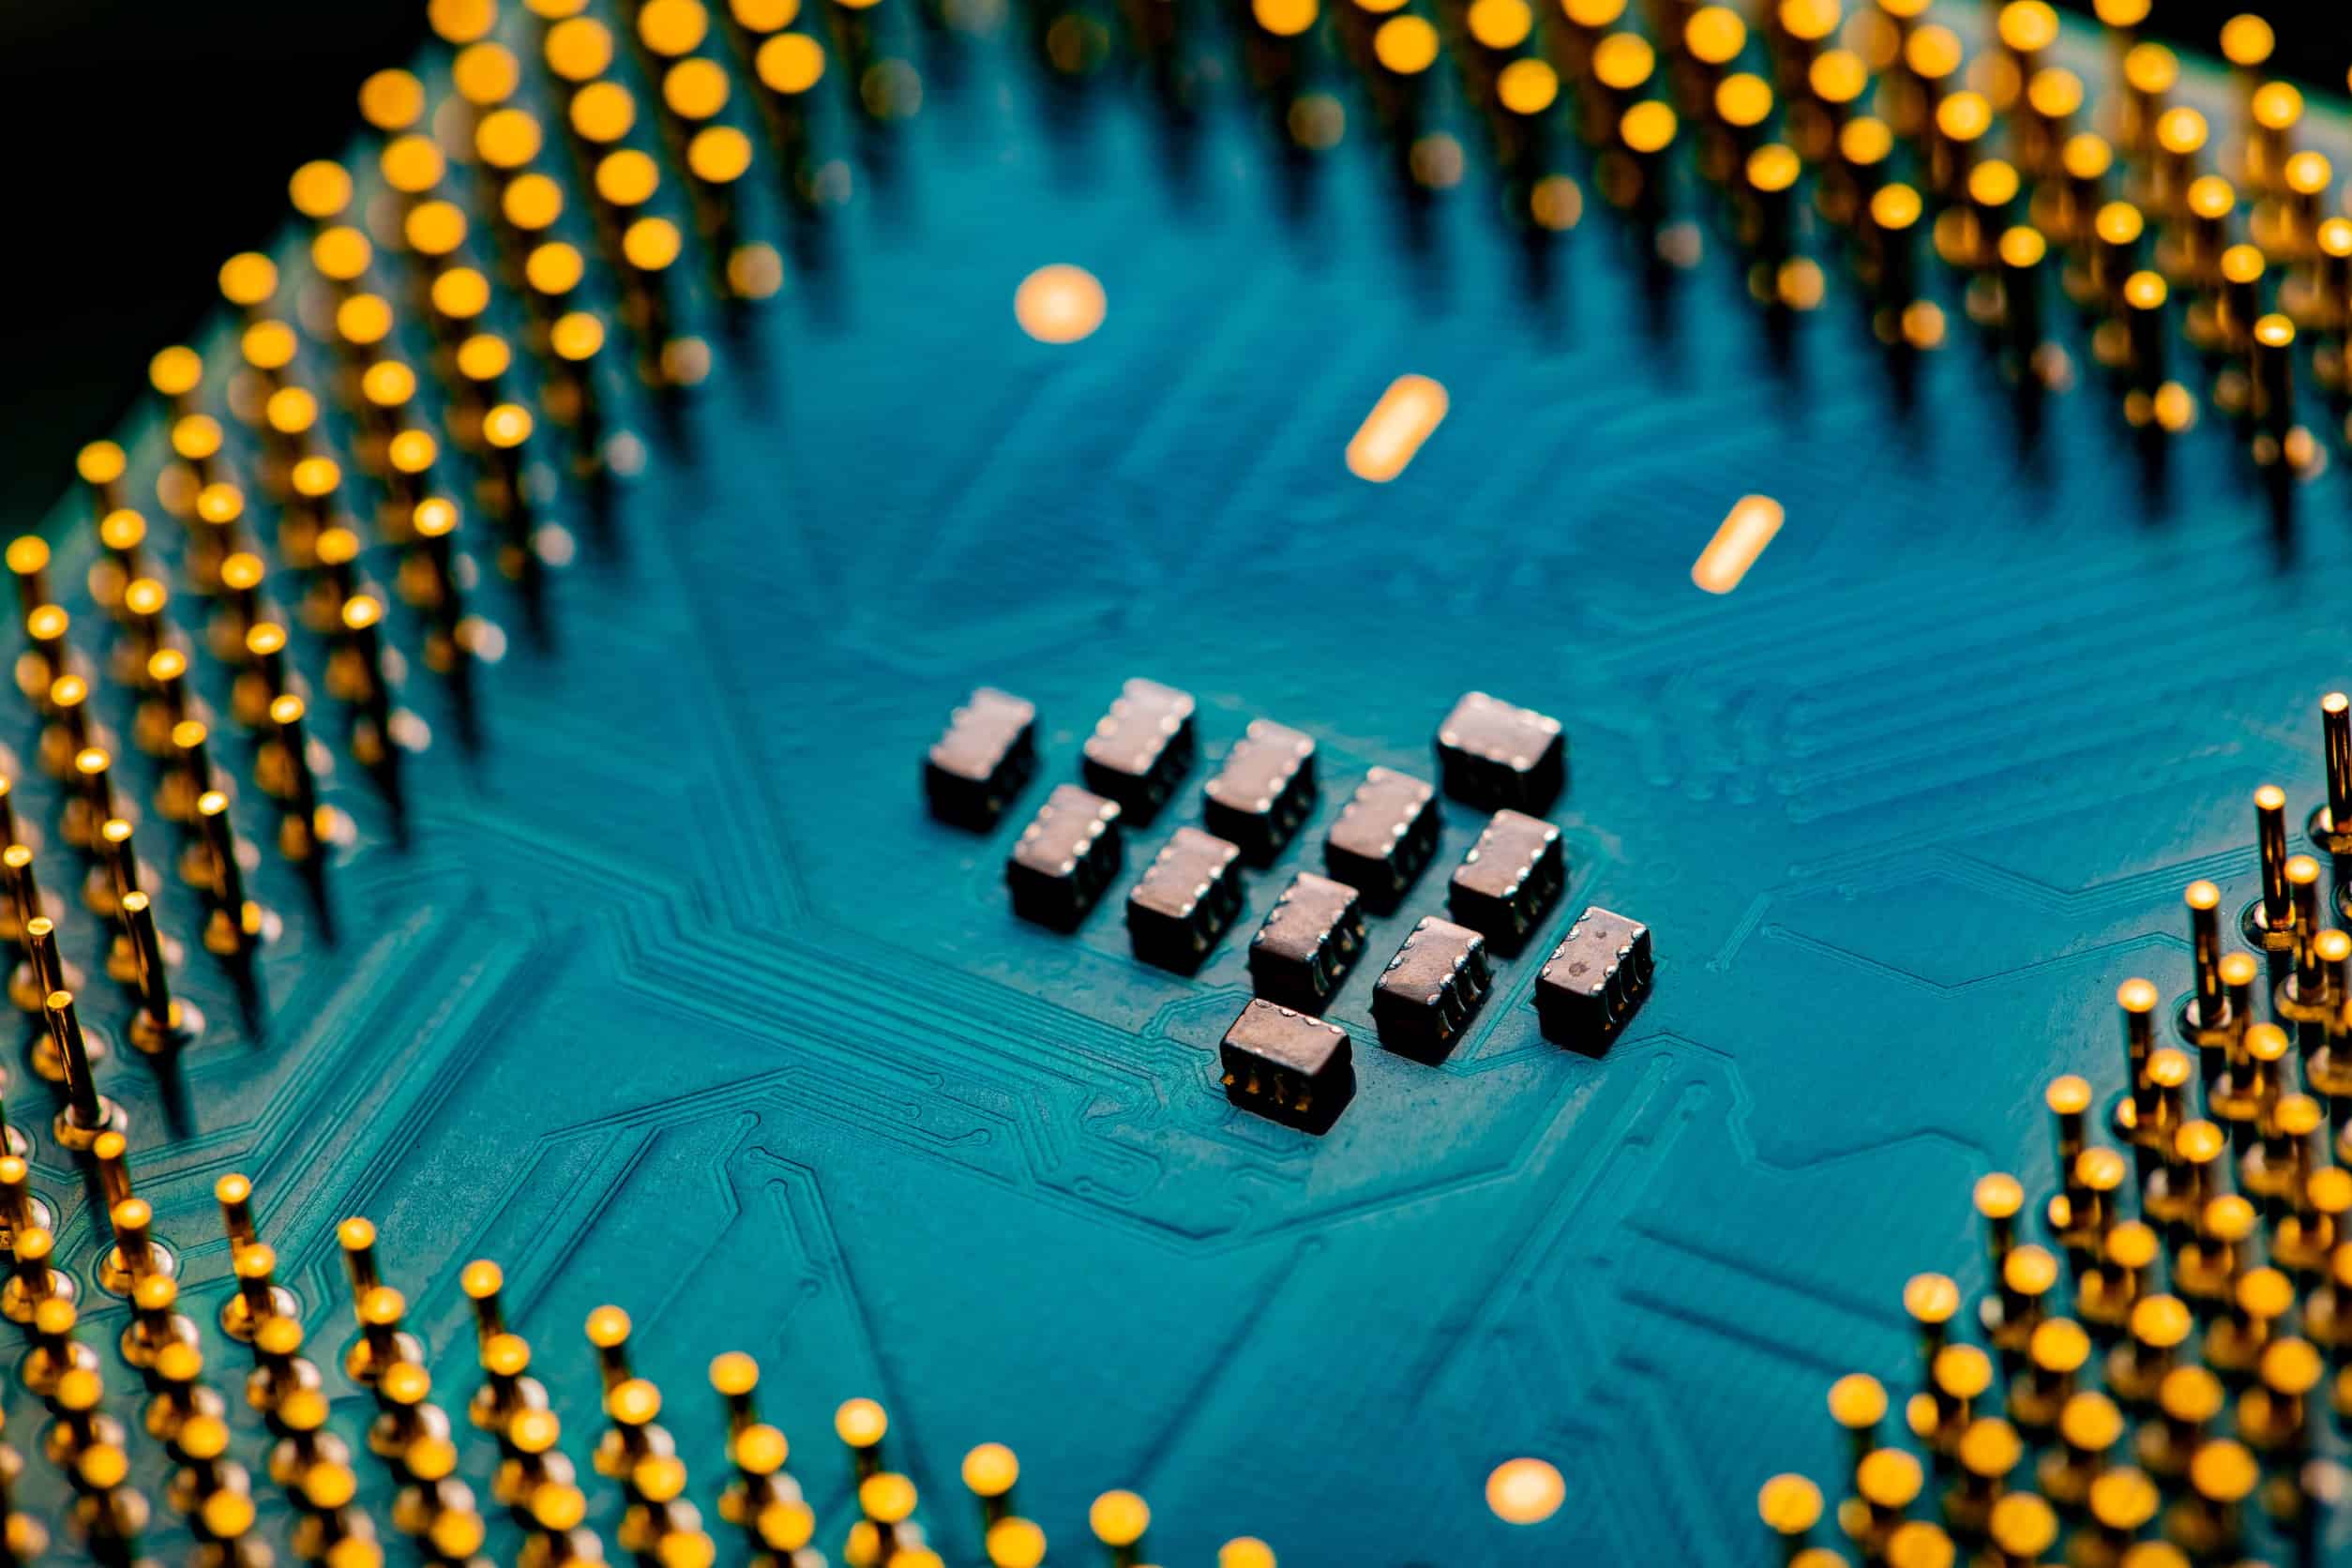 A close-up image of a PC computer chip, representing Intel's Operation Crush intiative.